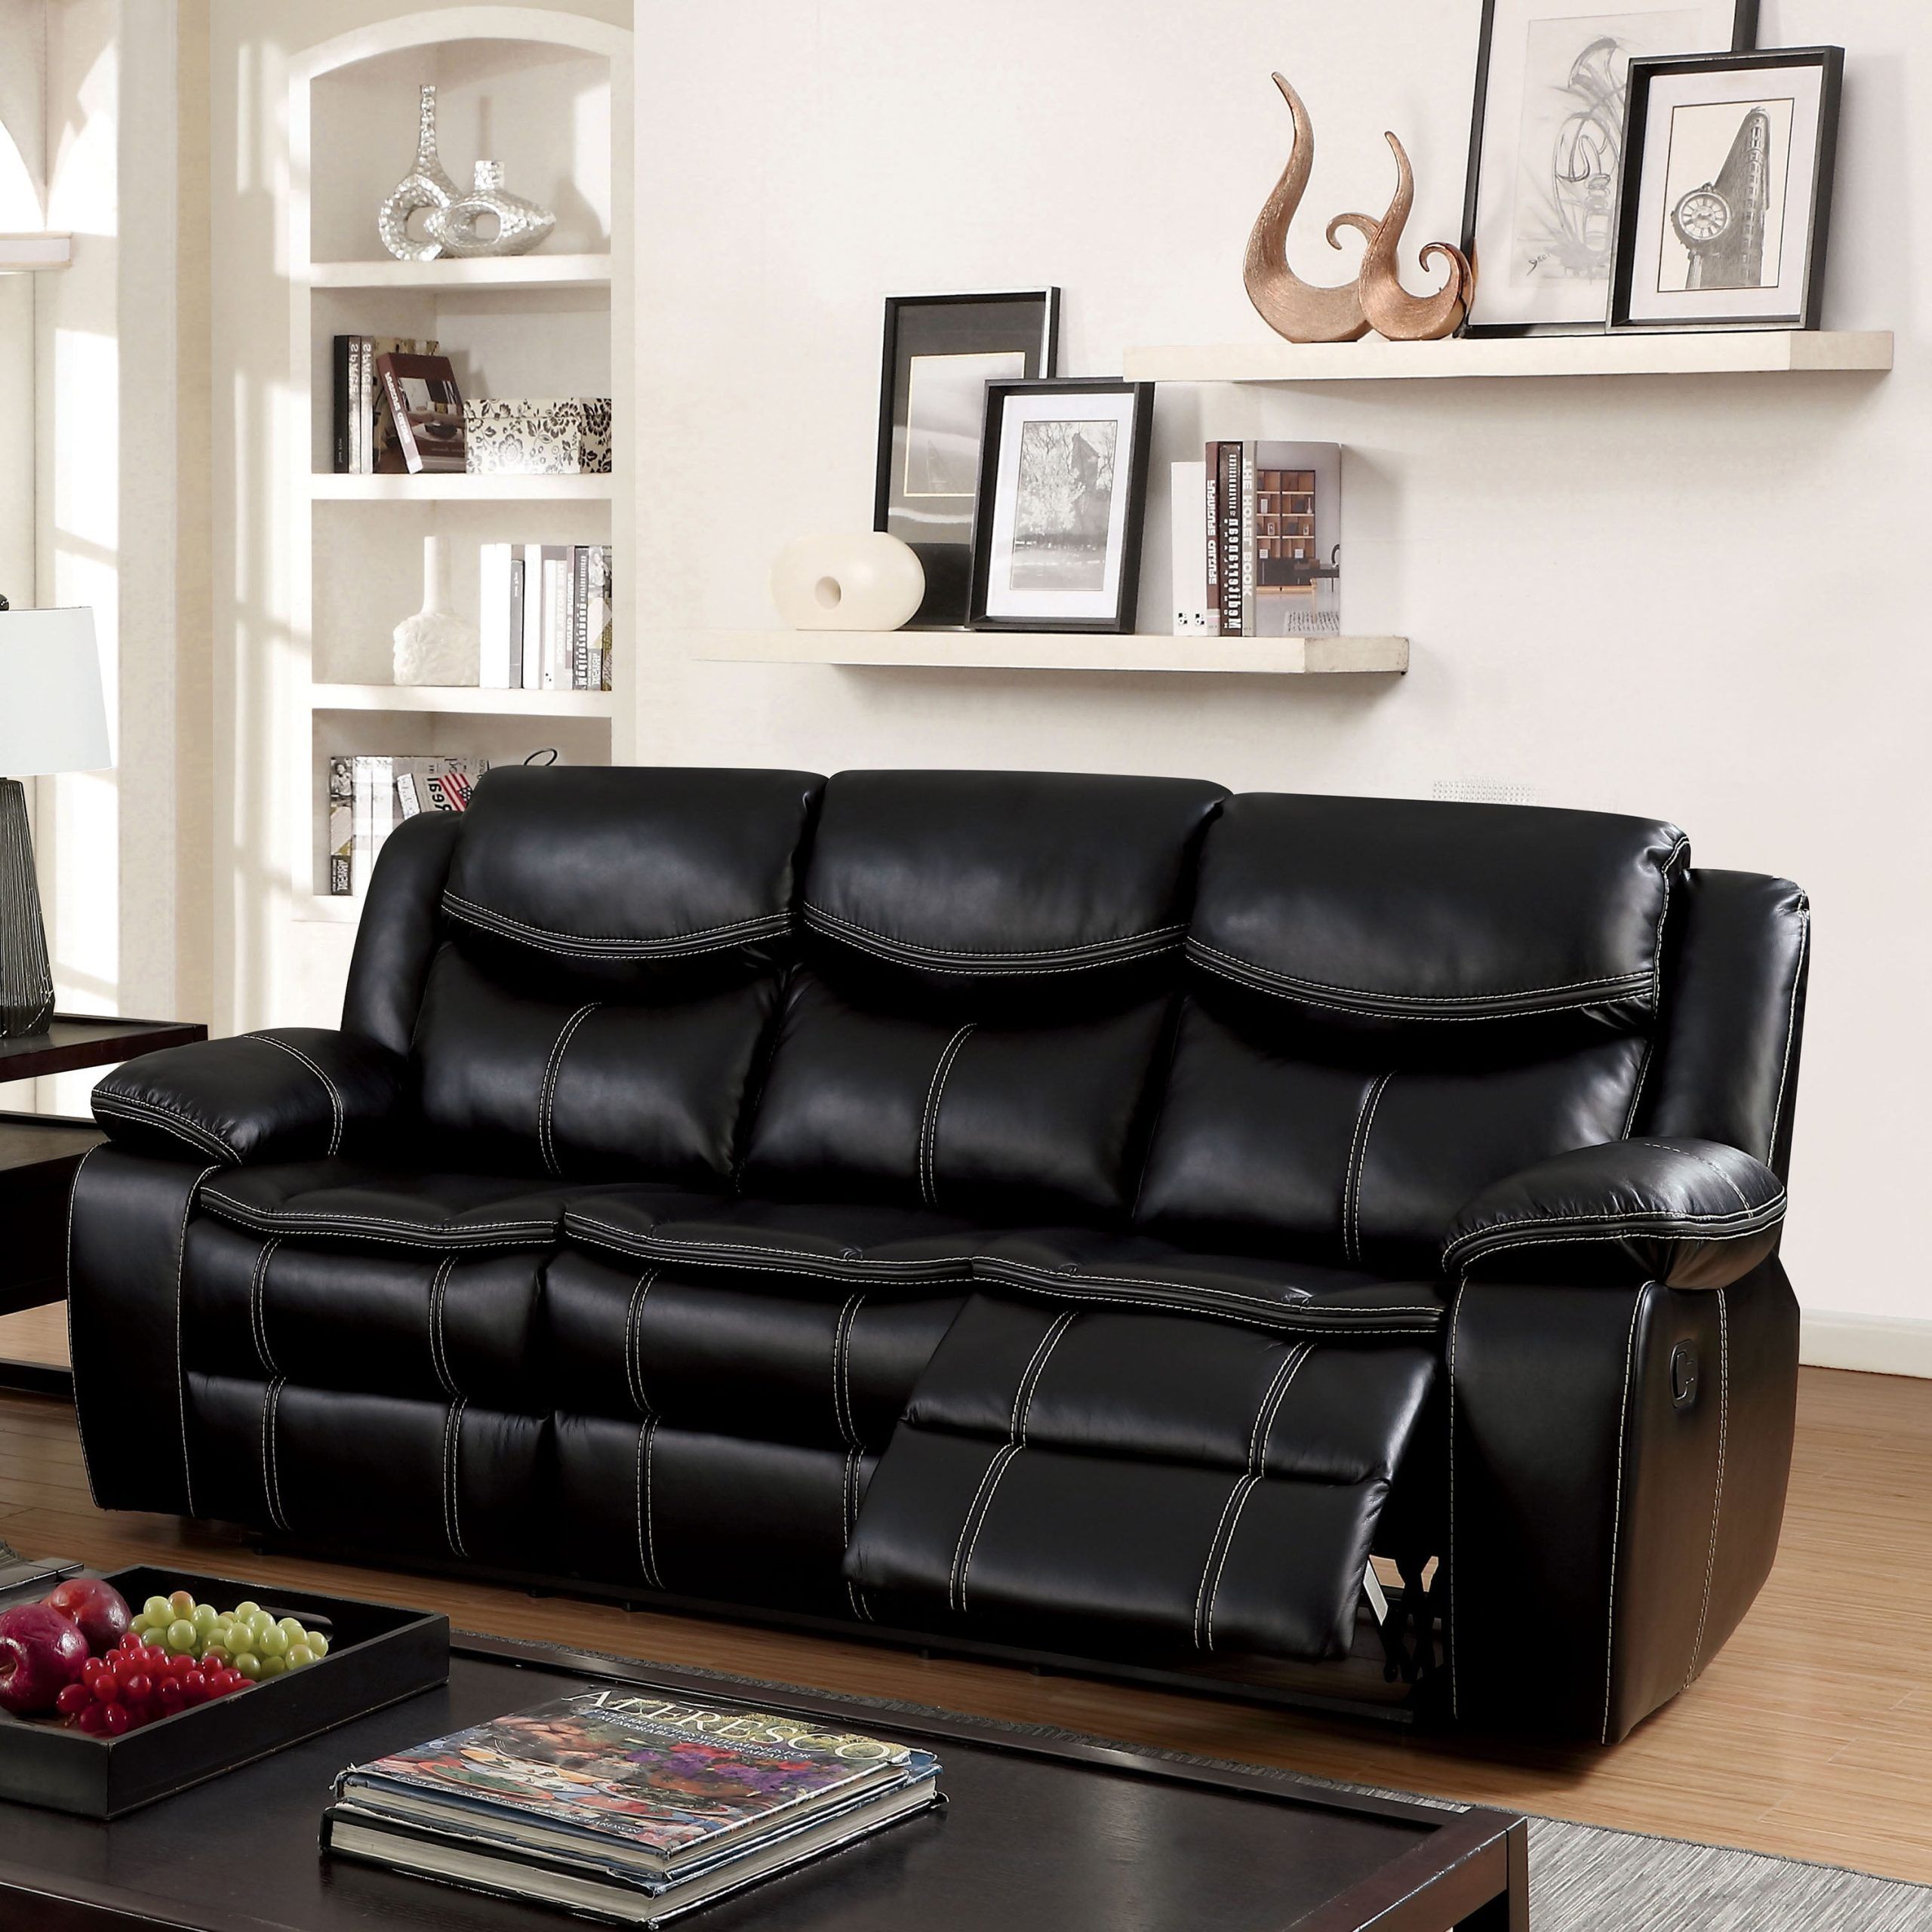 Furniture Of America Transitional Faux Leather Judson Reclining Sofa Intended For Right Facing Black Sofas (Gallery 16 of 20)